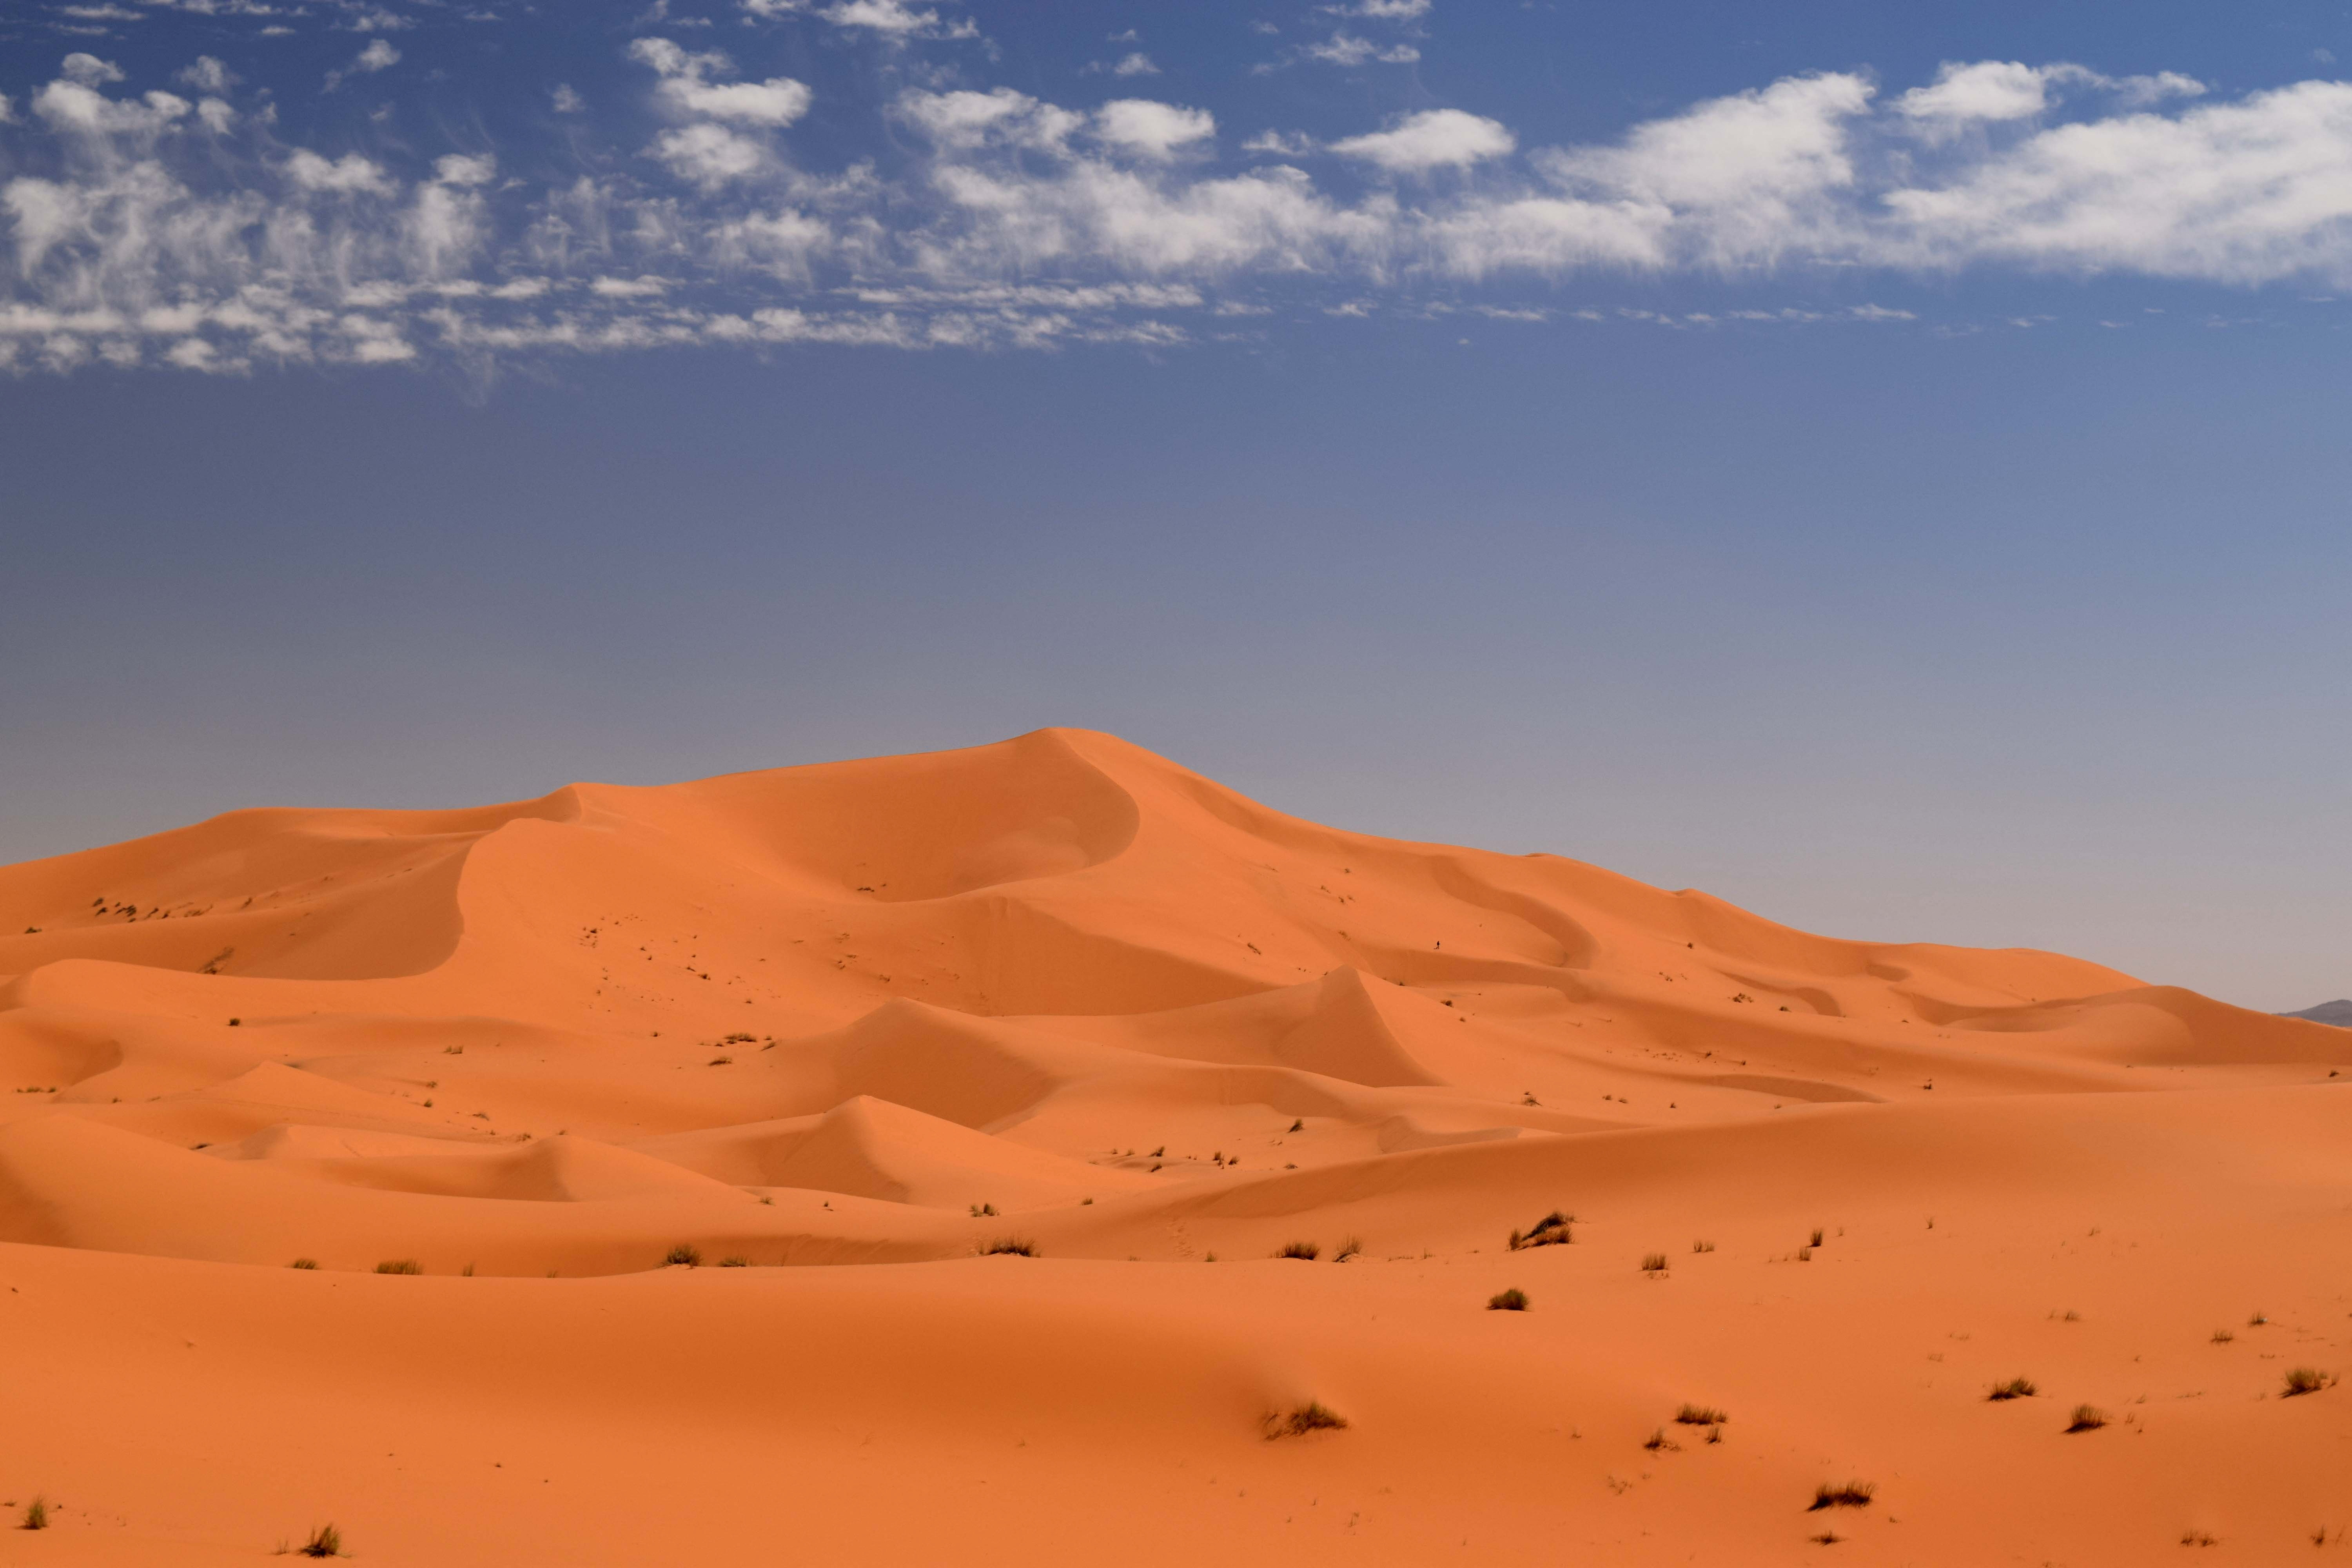 A view of the Lala Lallia star dune of the Sahara Desert